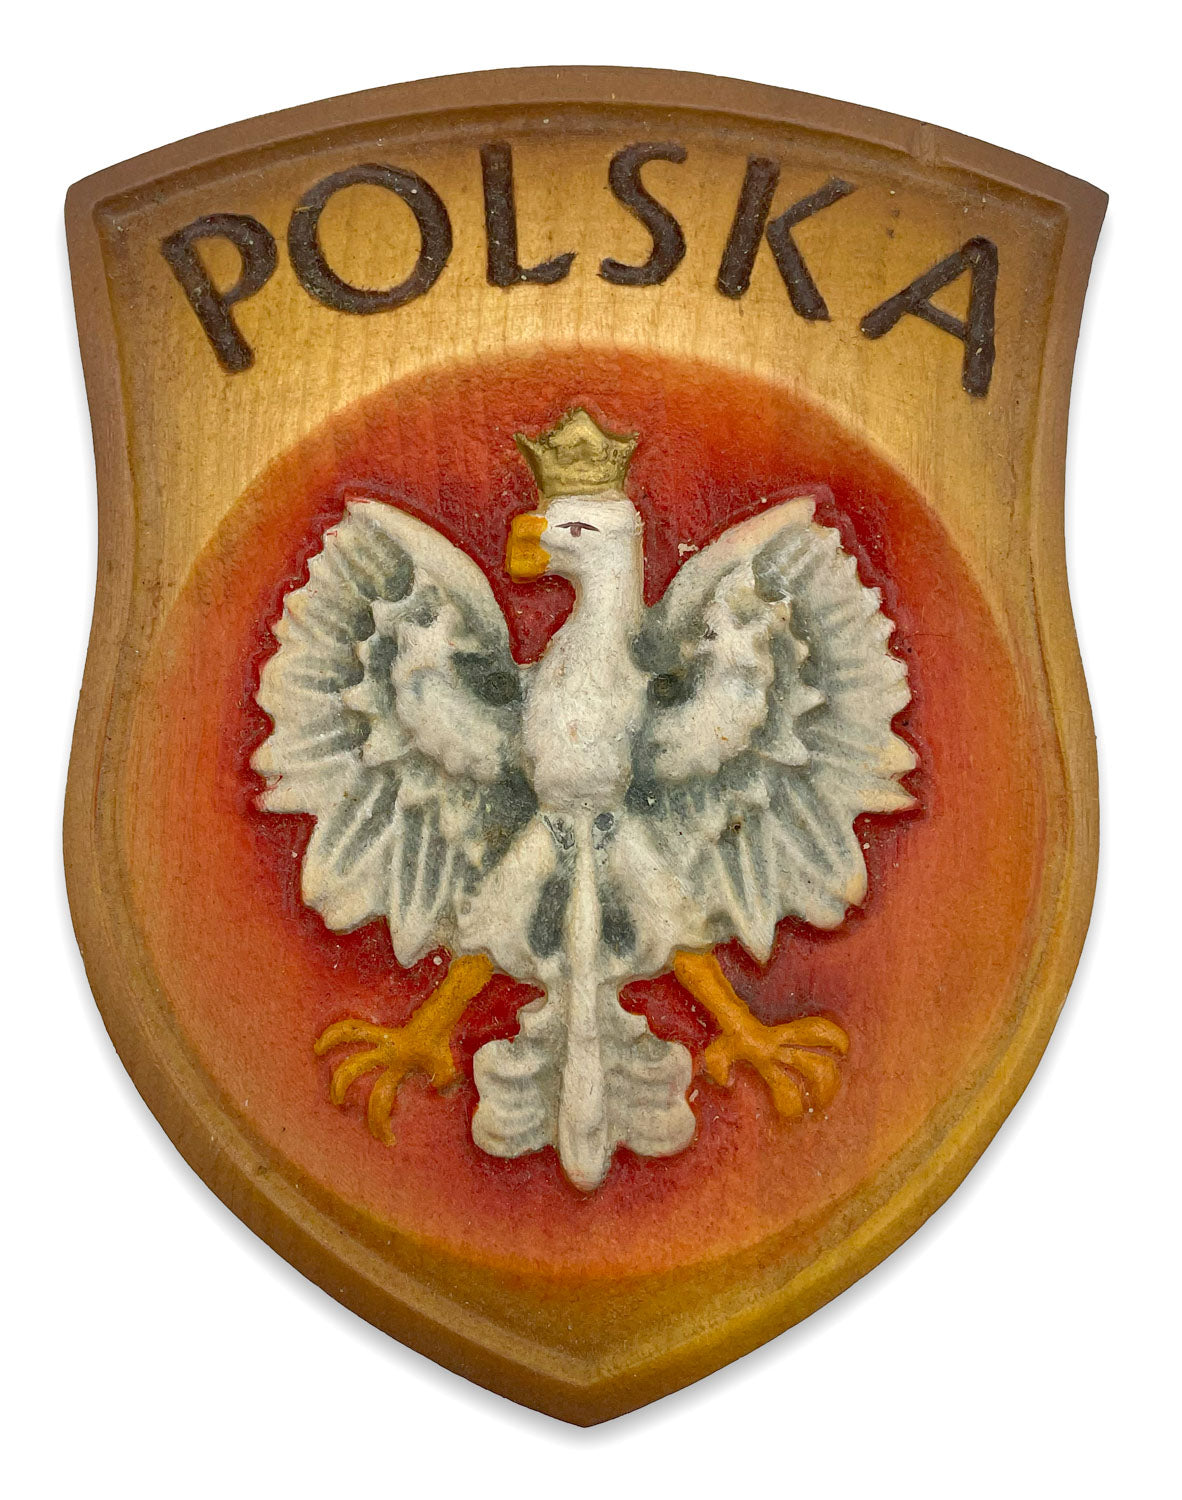 Wood Carved Coat of Arms of Poland, Small & Hollow